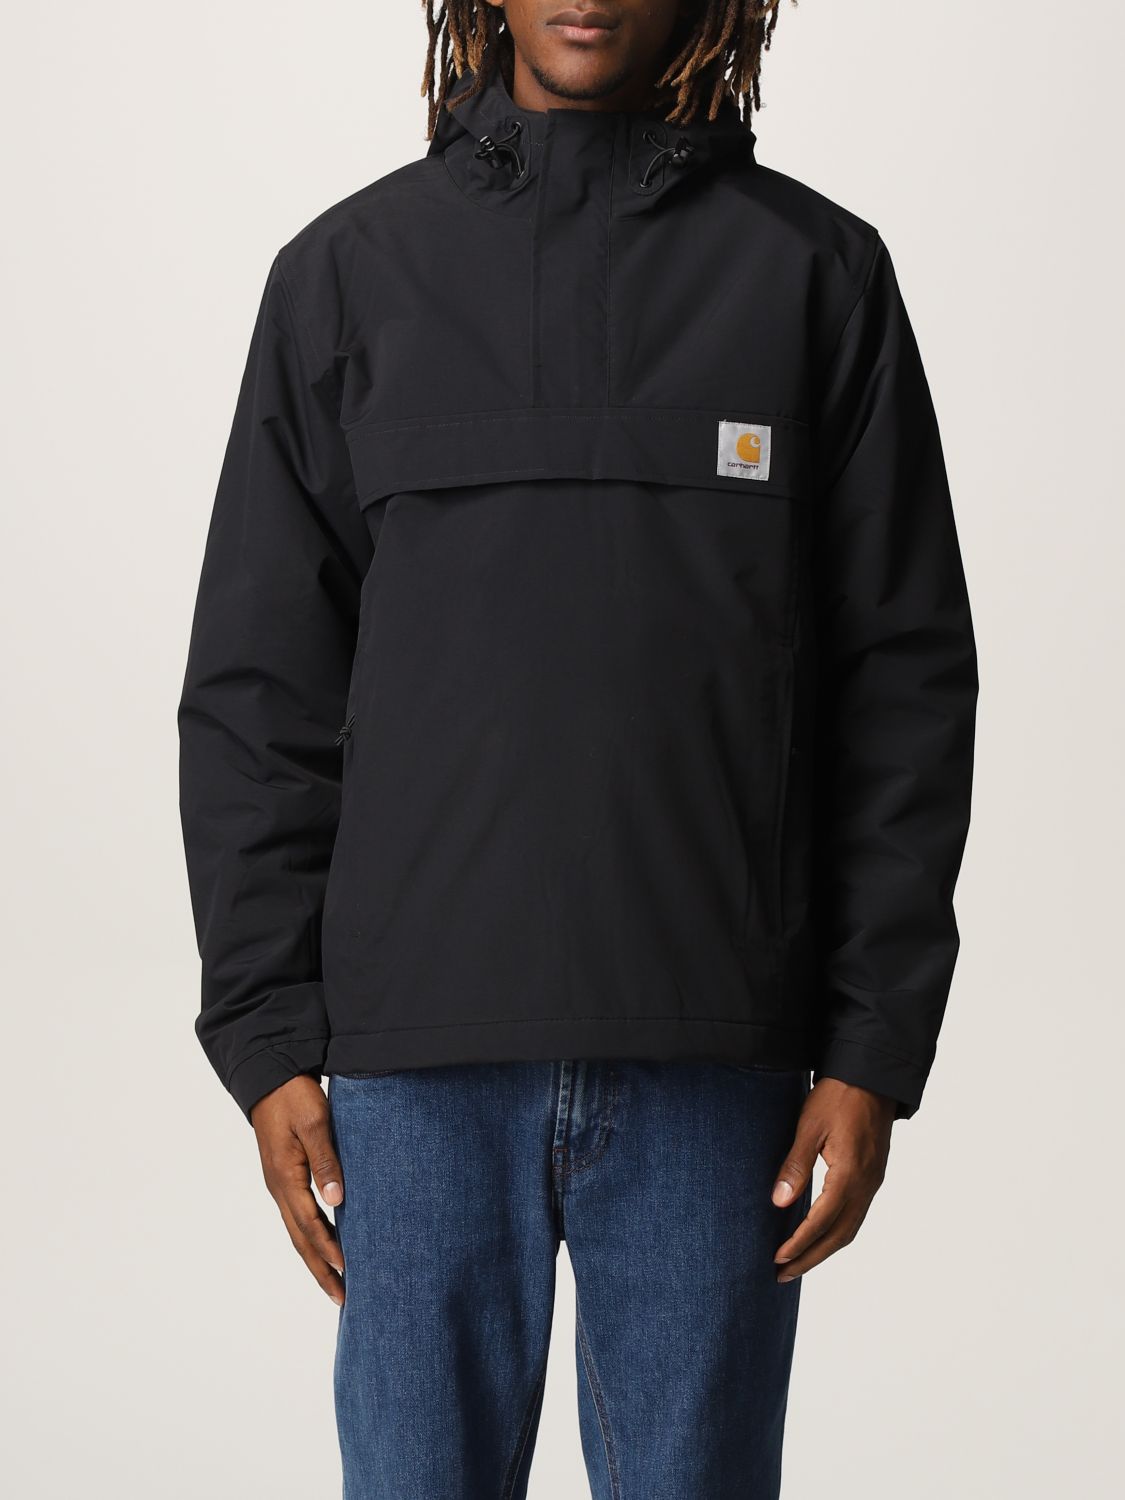 CARHARTT WIP: for man - Black 1 coat I02843503 online on GIGLIO.COM